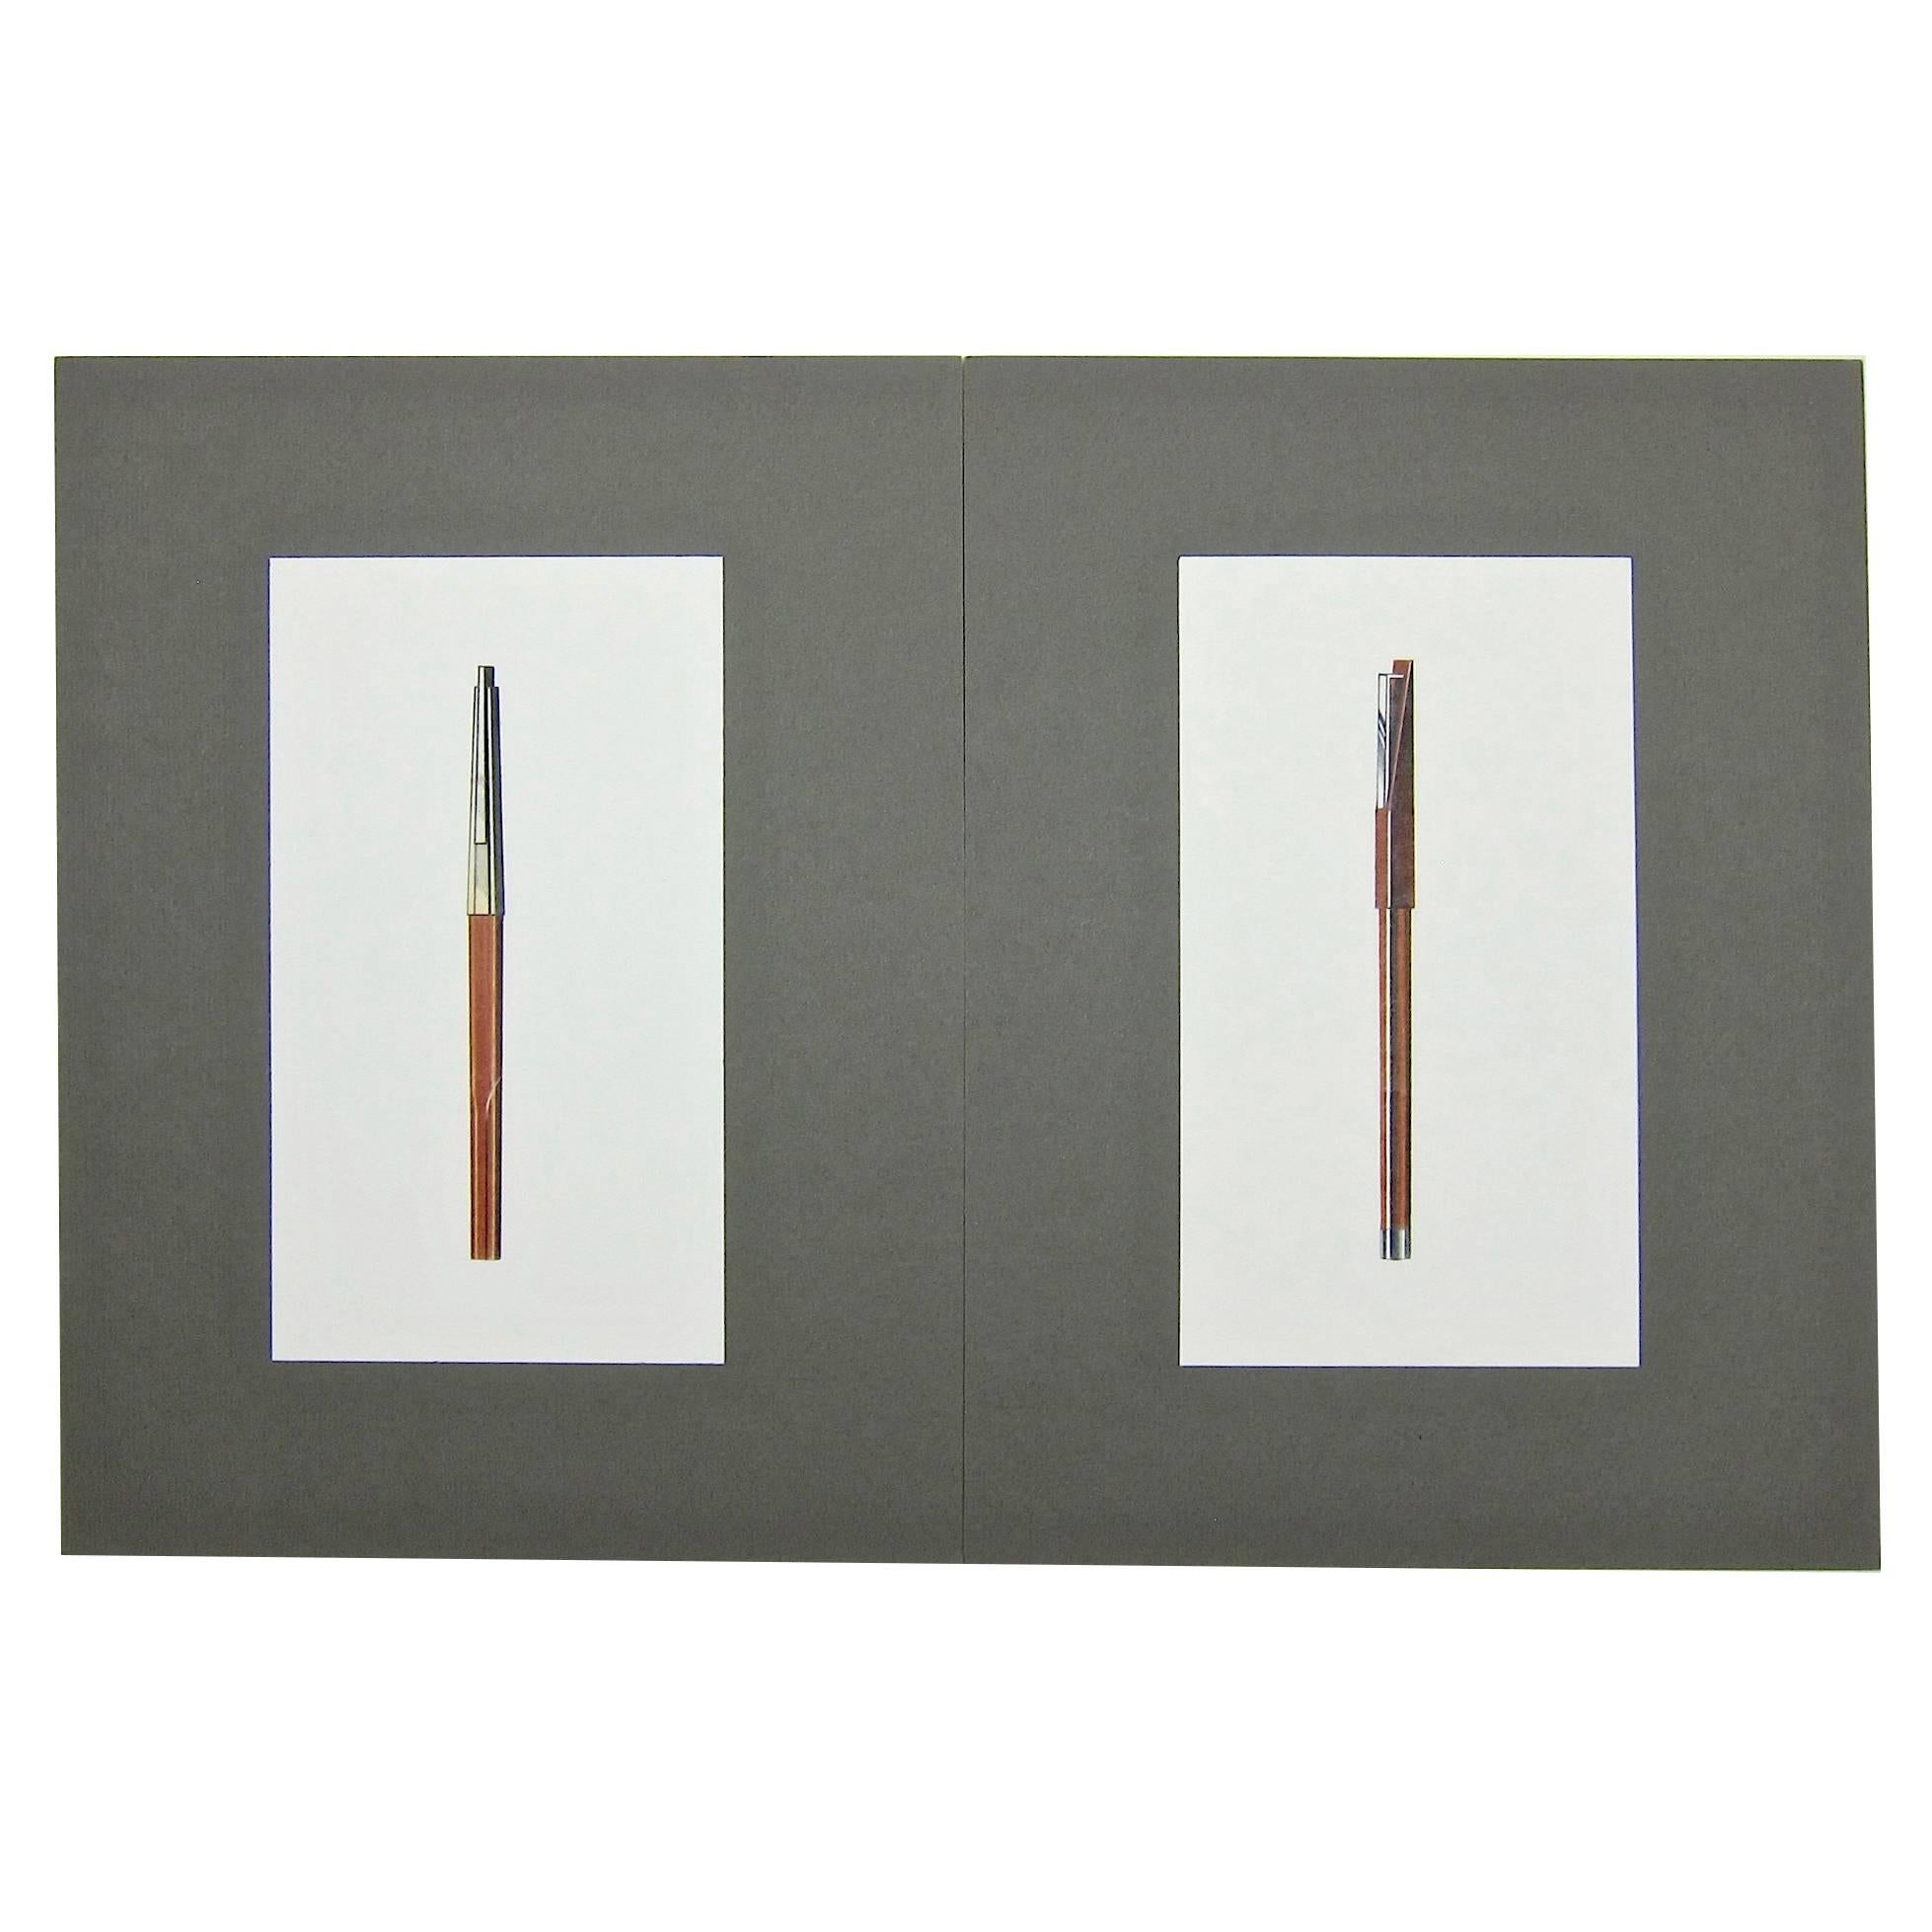 Two Original Jerome Gould Mixed-Media Design Drawings for Writing Instruments